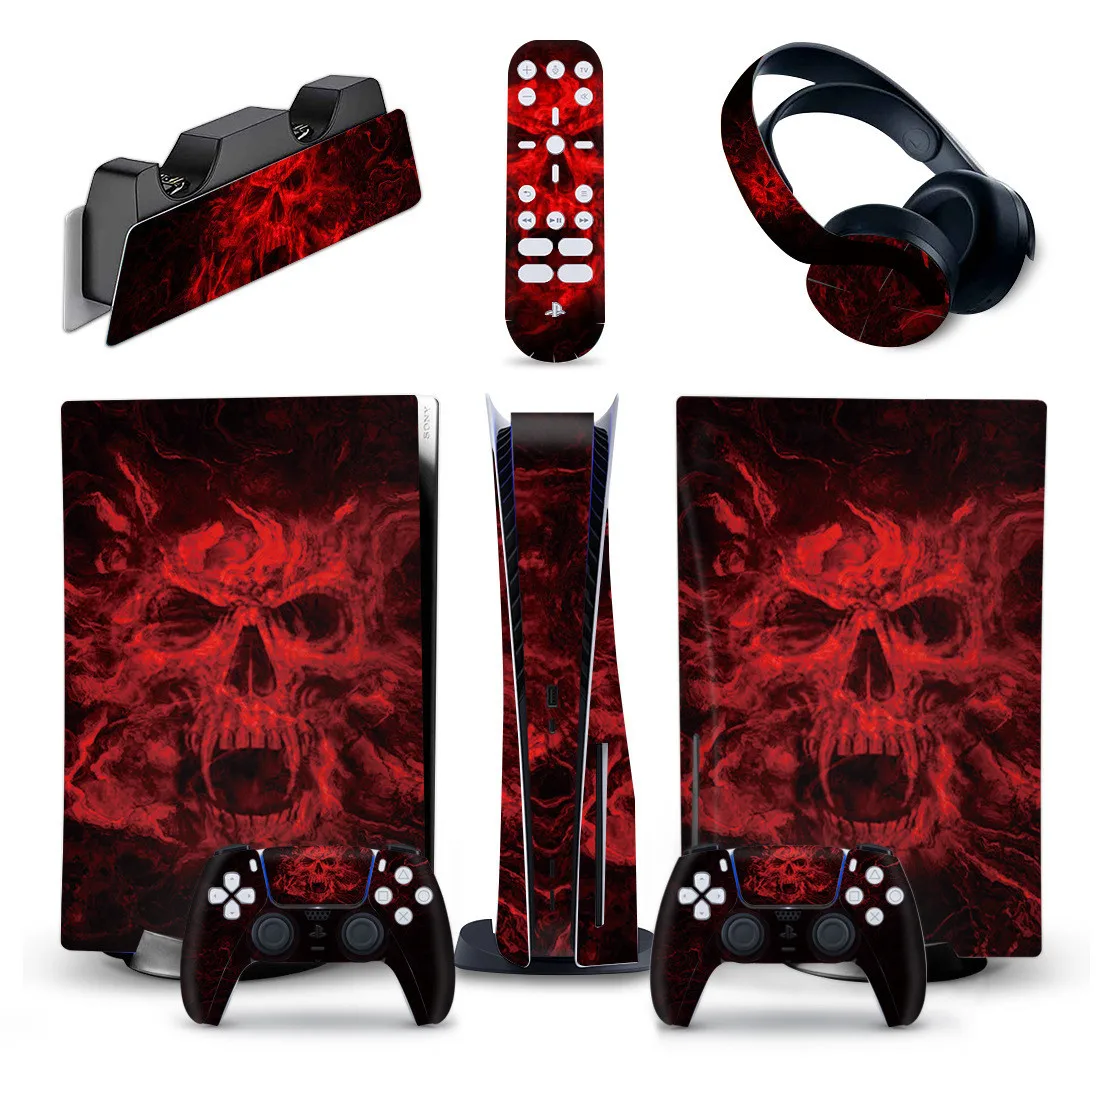 Stickers 5 in Skin Sticker For PlayStation5 Disk Edition Console Antislip Stickers For SONY PS 5 Controller Gameing Accessories